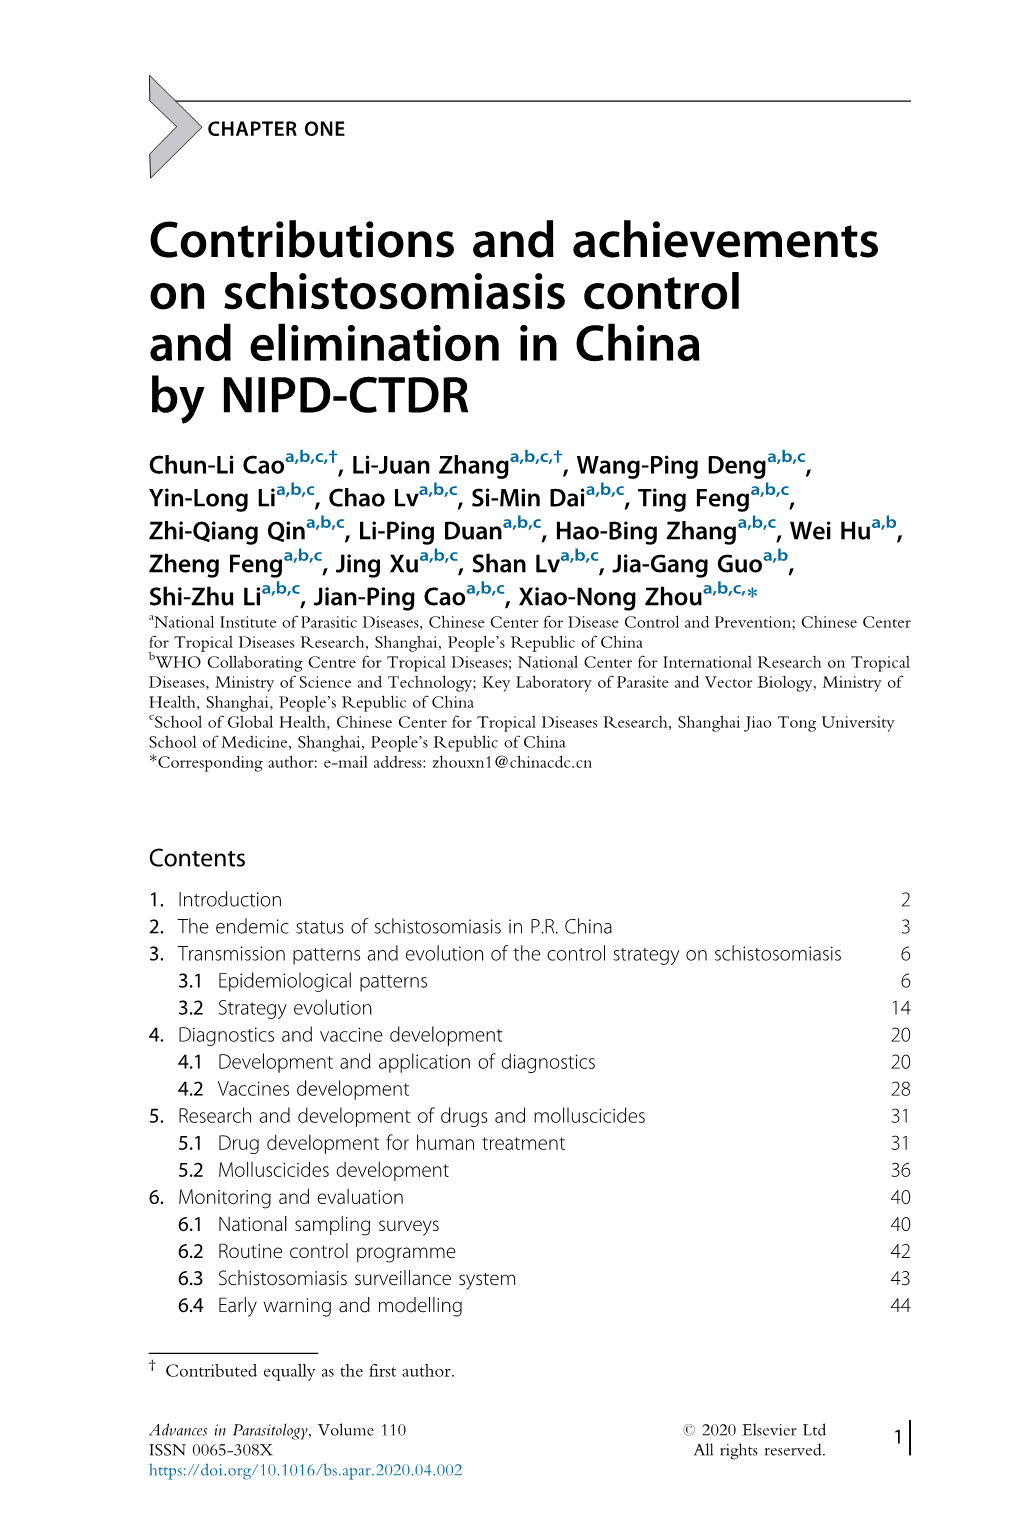 Contributions and Achievements on Schistosomiasis Control and Elimination in China by NIPD-CTDR